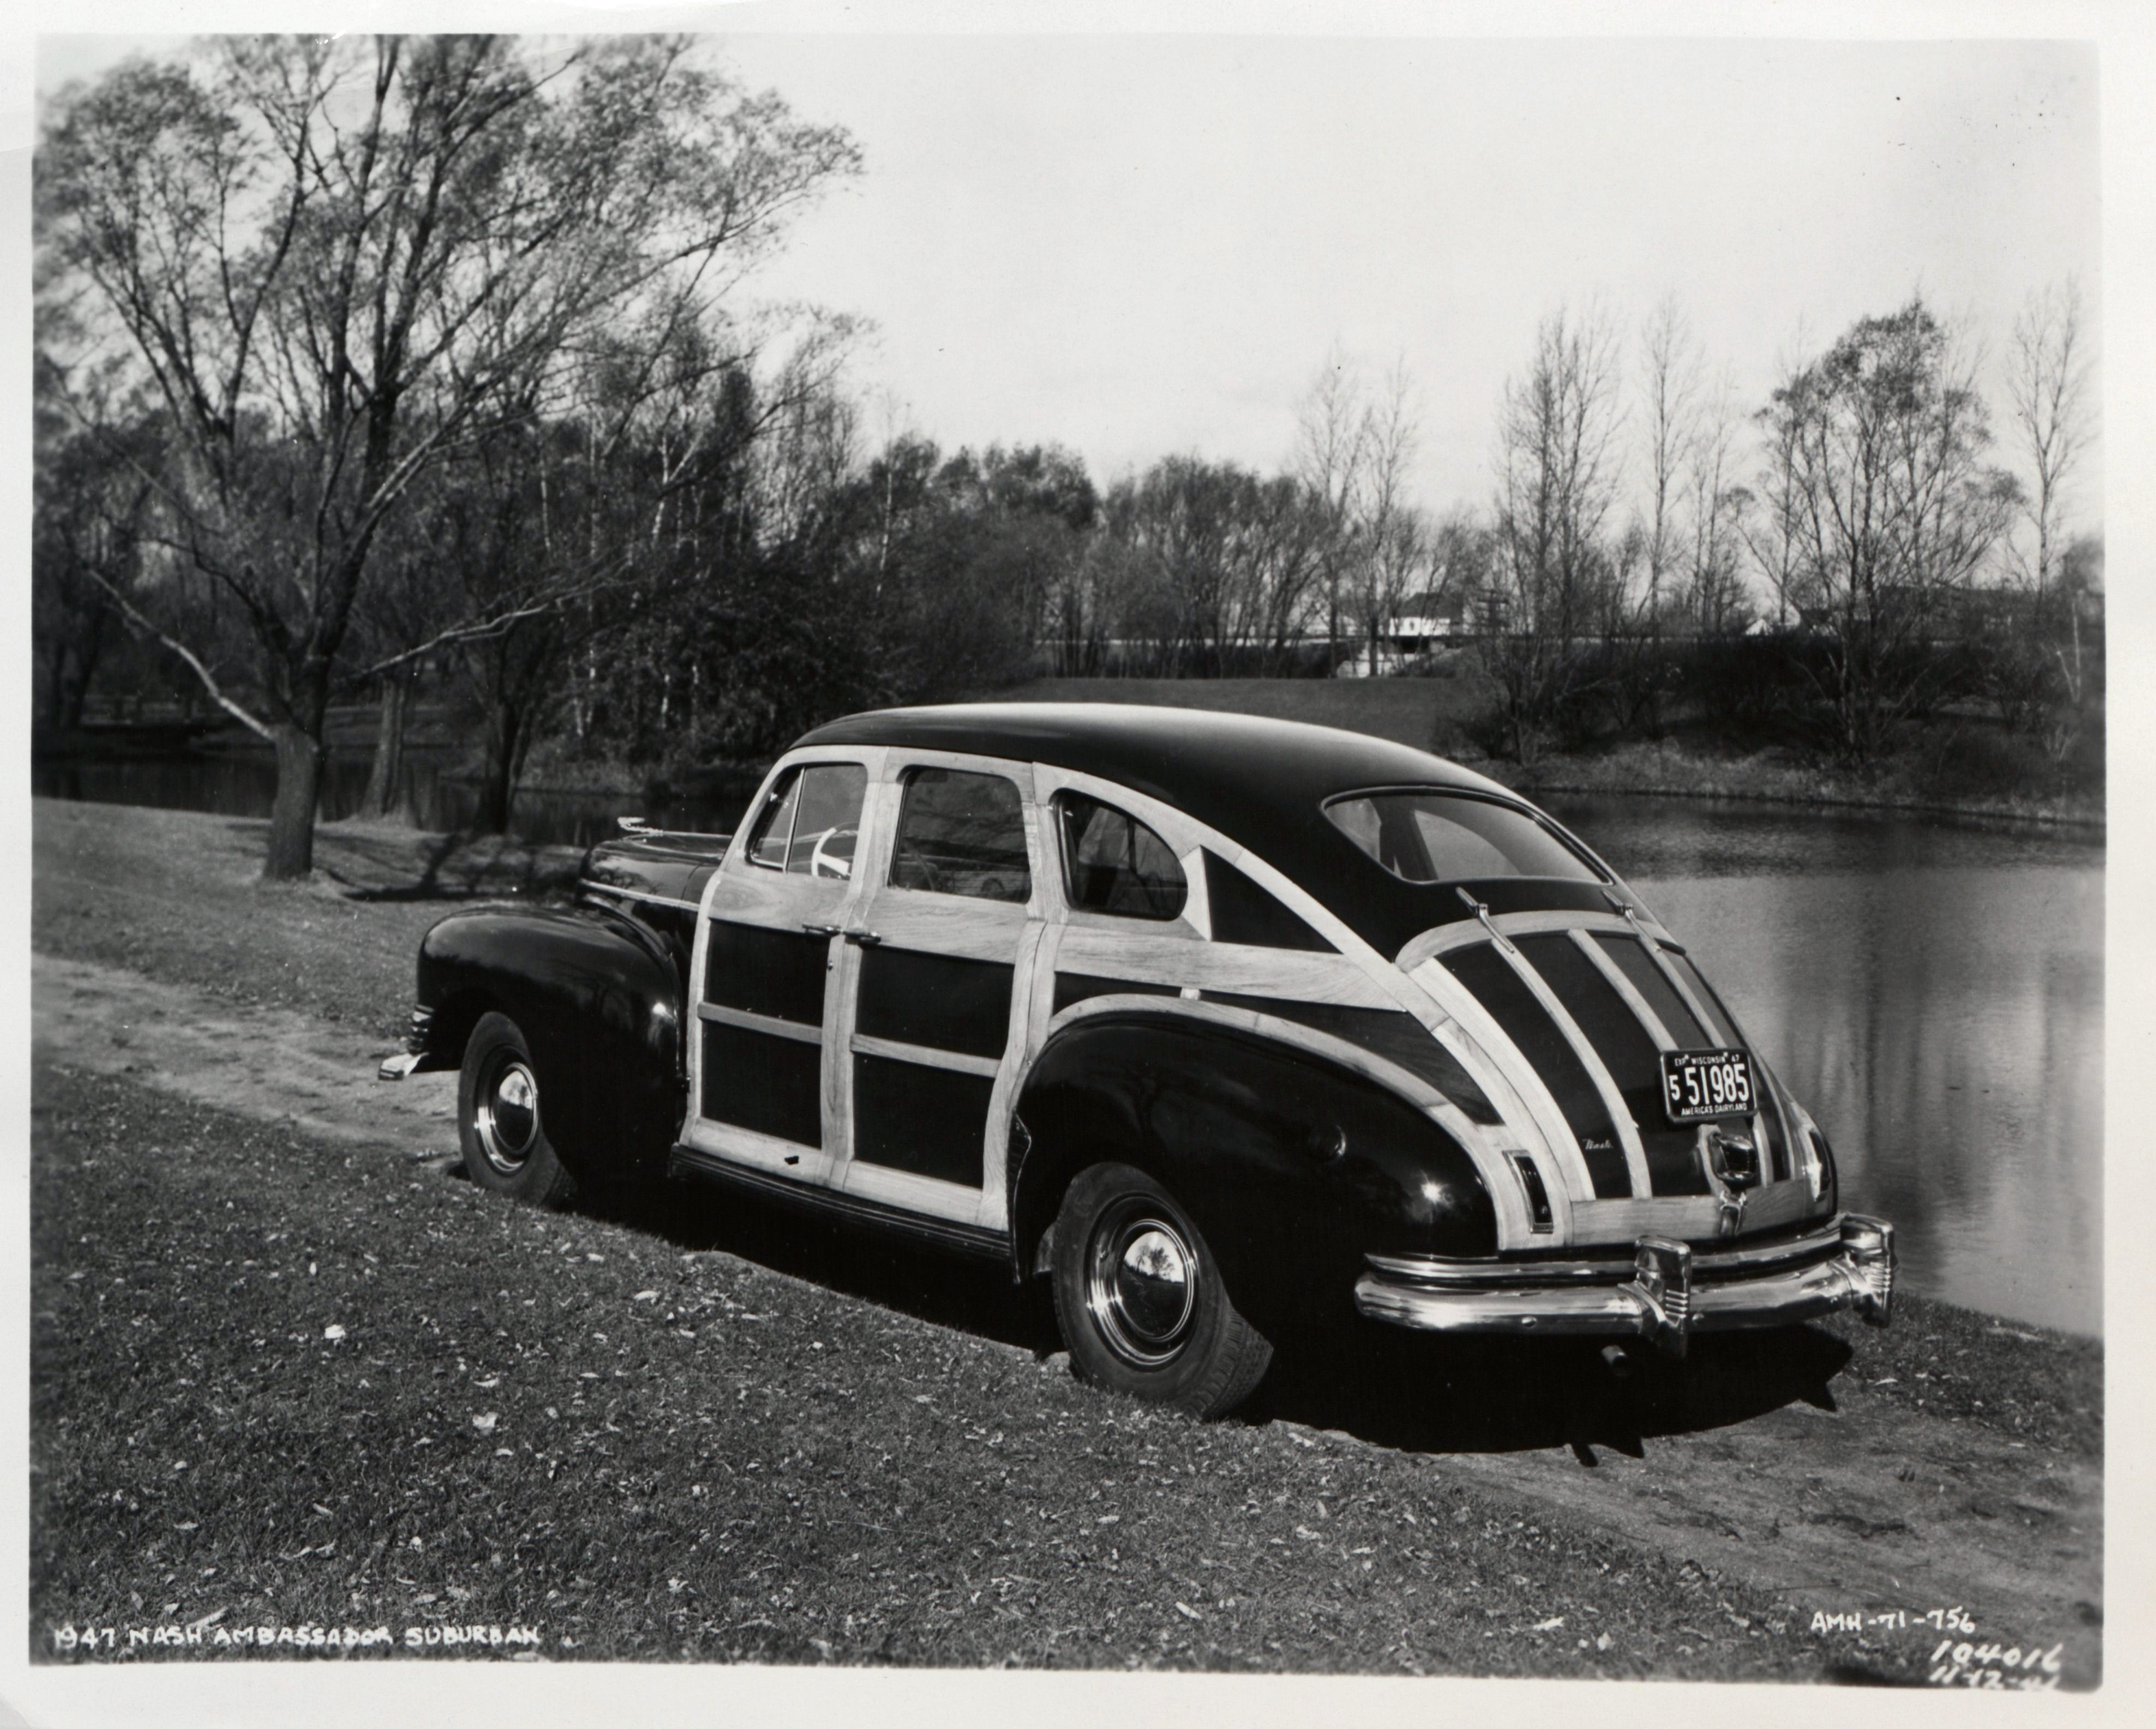 Black and white photograph of a wood-paneled 1947 Nash Ambassador Suburban parked on a dirt roadway by a body of water.